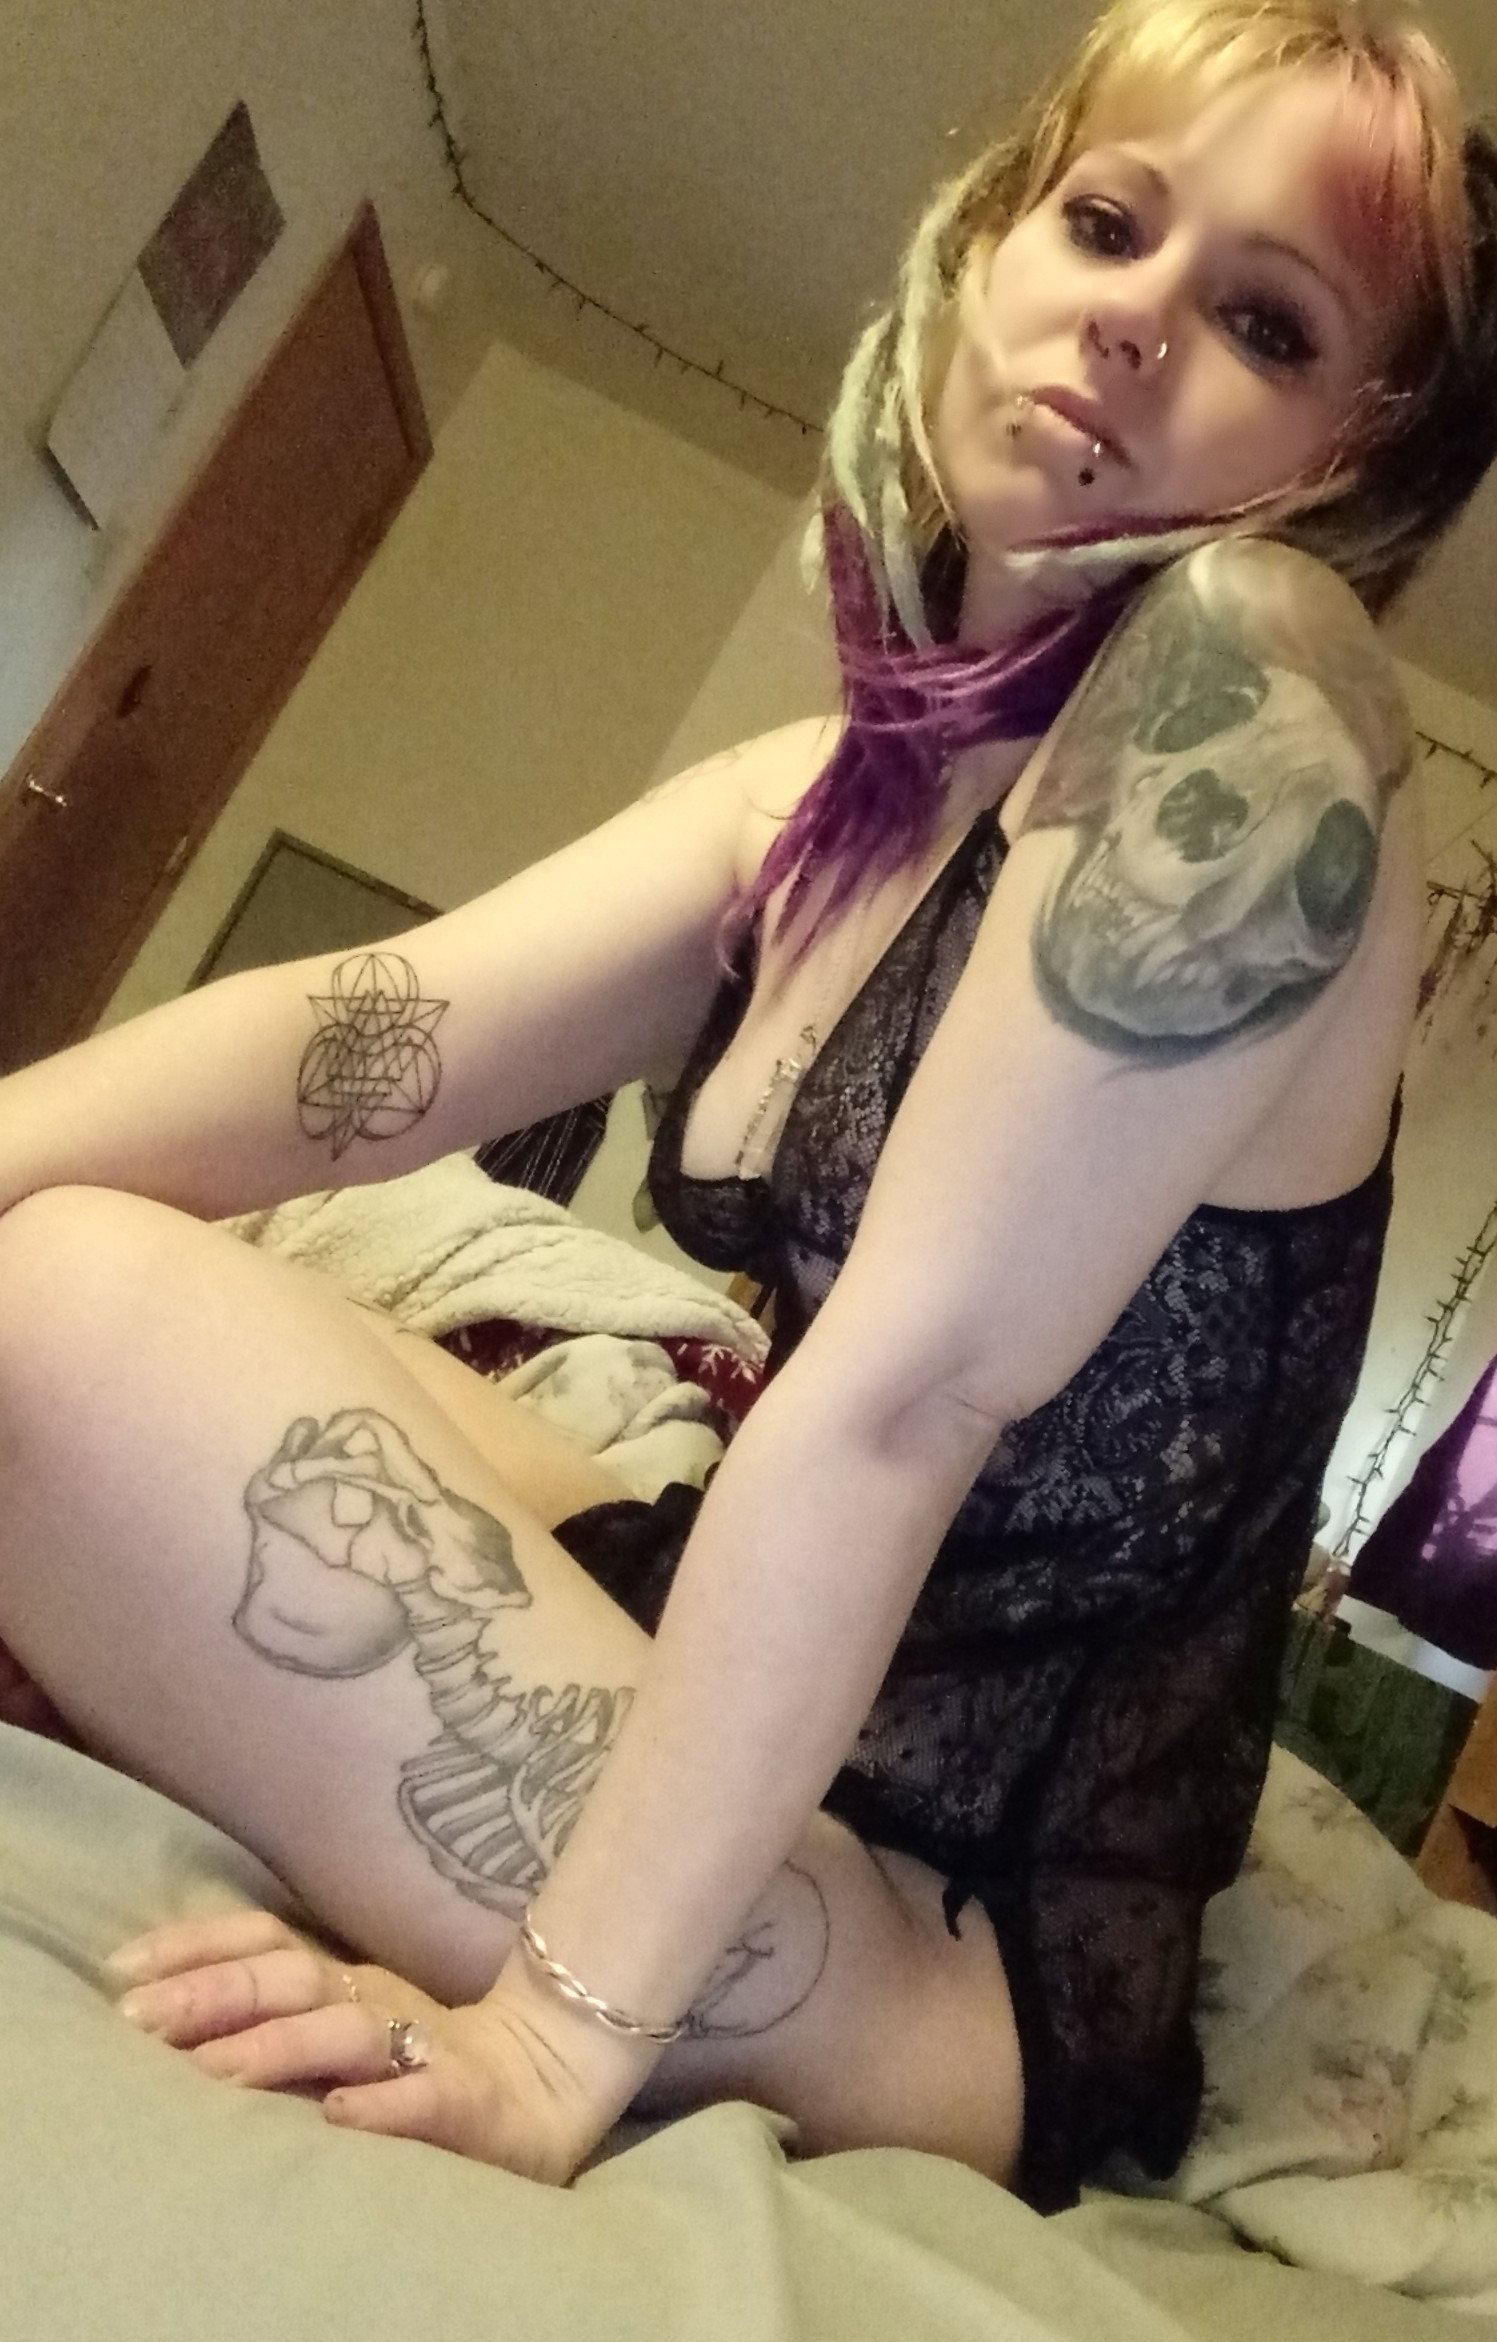 Photo by Princesskitten with the username @Princesskitten, who is a star user,  April 7, 2019 at 4:01 PM. The post is about the topic Amateurs and the text says 'Cum see much more of me! Onlyfans.com/princess_kitten'